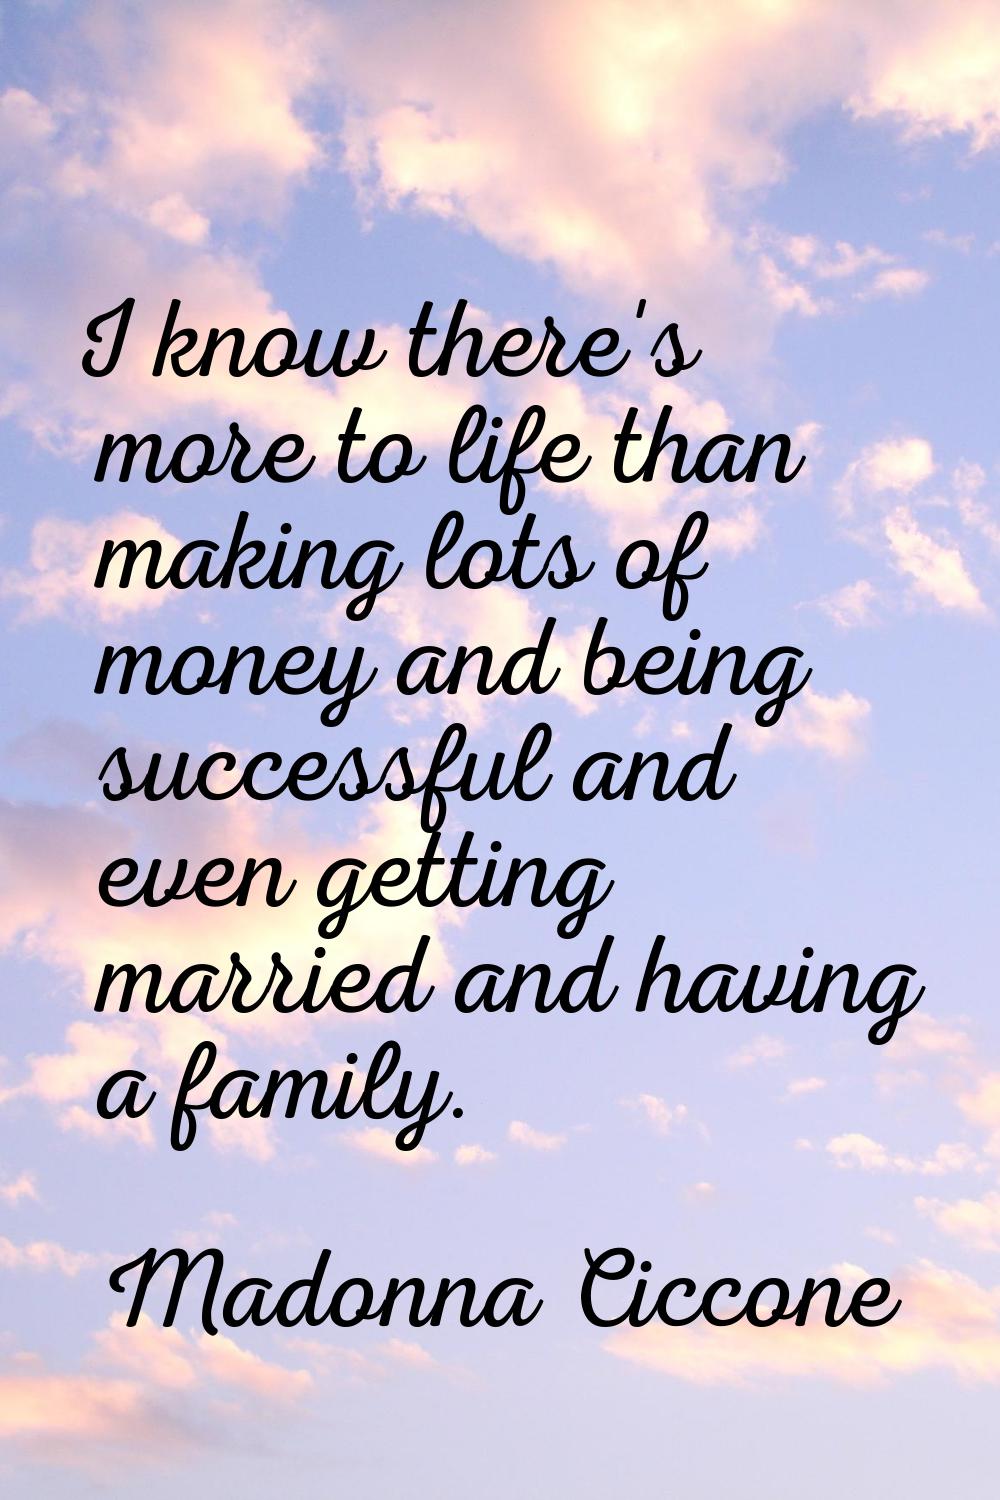 I know there's more to life than making lots of money and being successful and even getting married